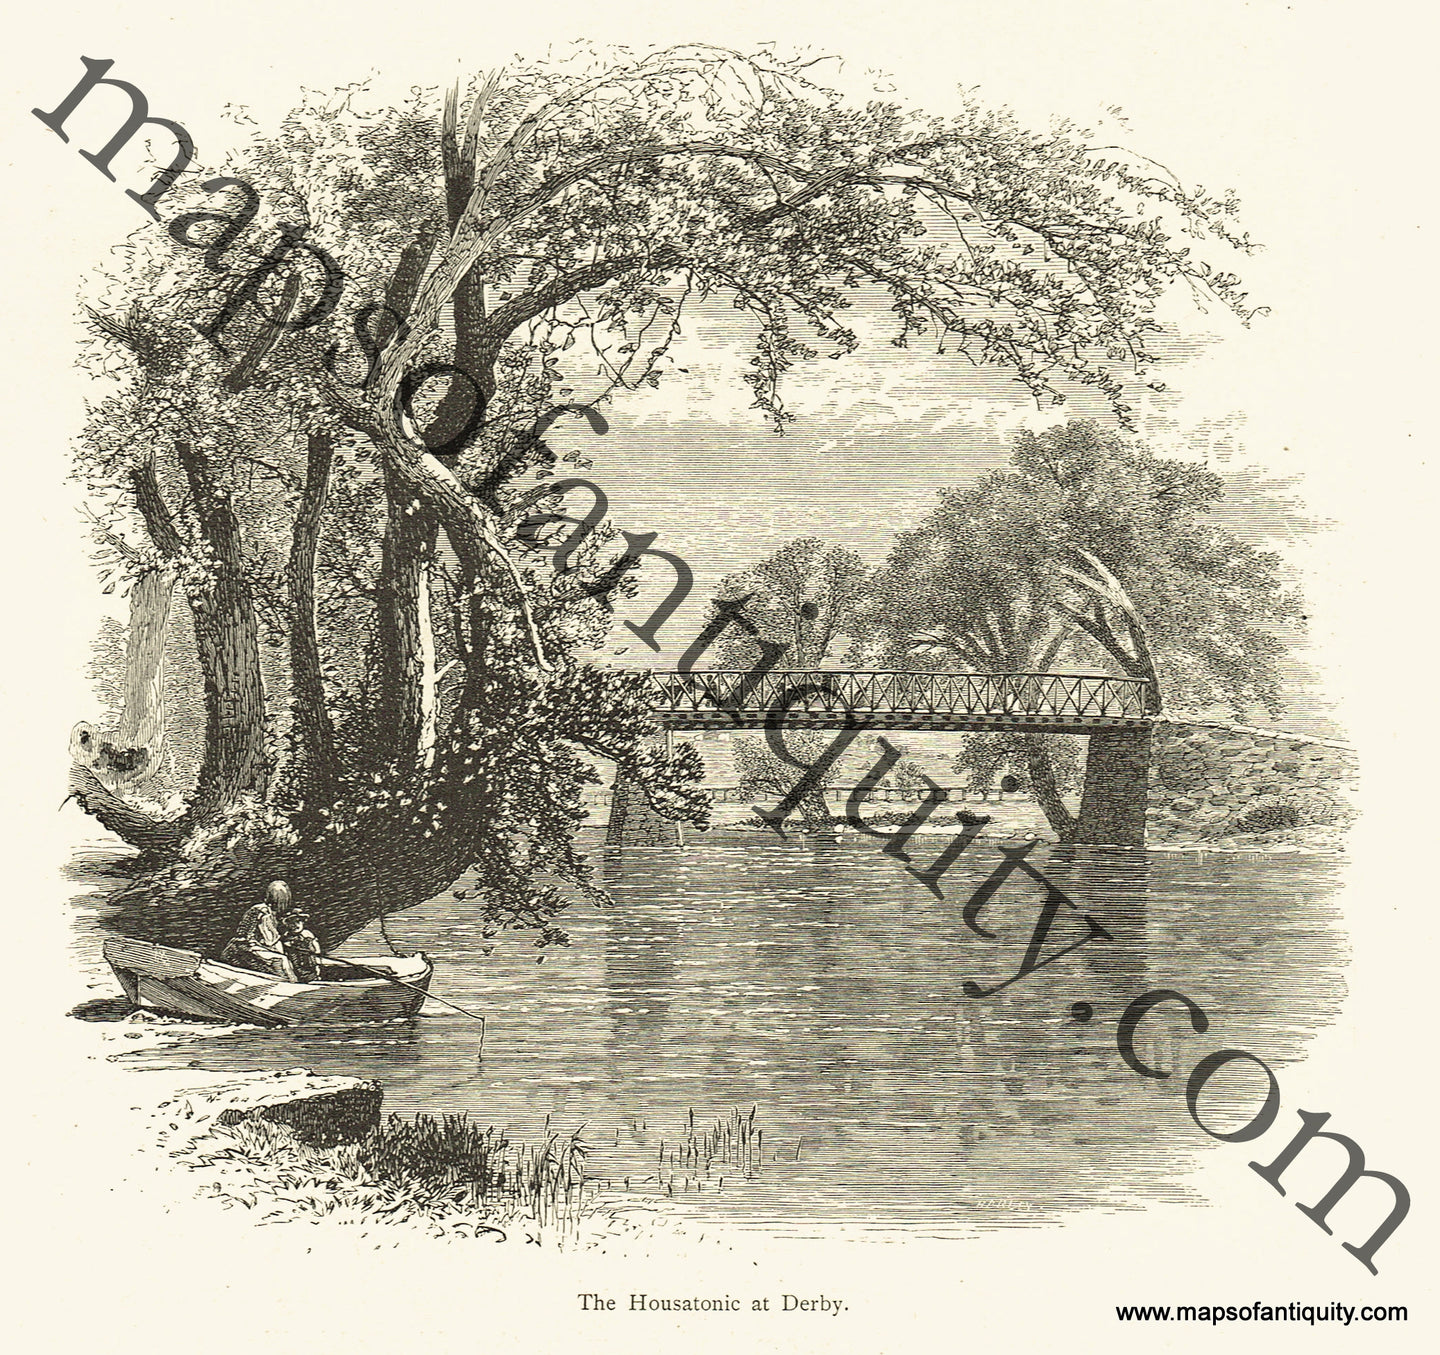 Antique-Black-and-White-Engraved-Illustration-The-Housatonic-at-Derby-United-States-Northeast-1872-Picturesque-America-Maps-Of-Antiquity